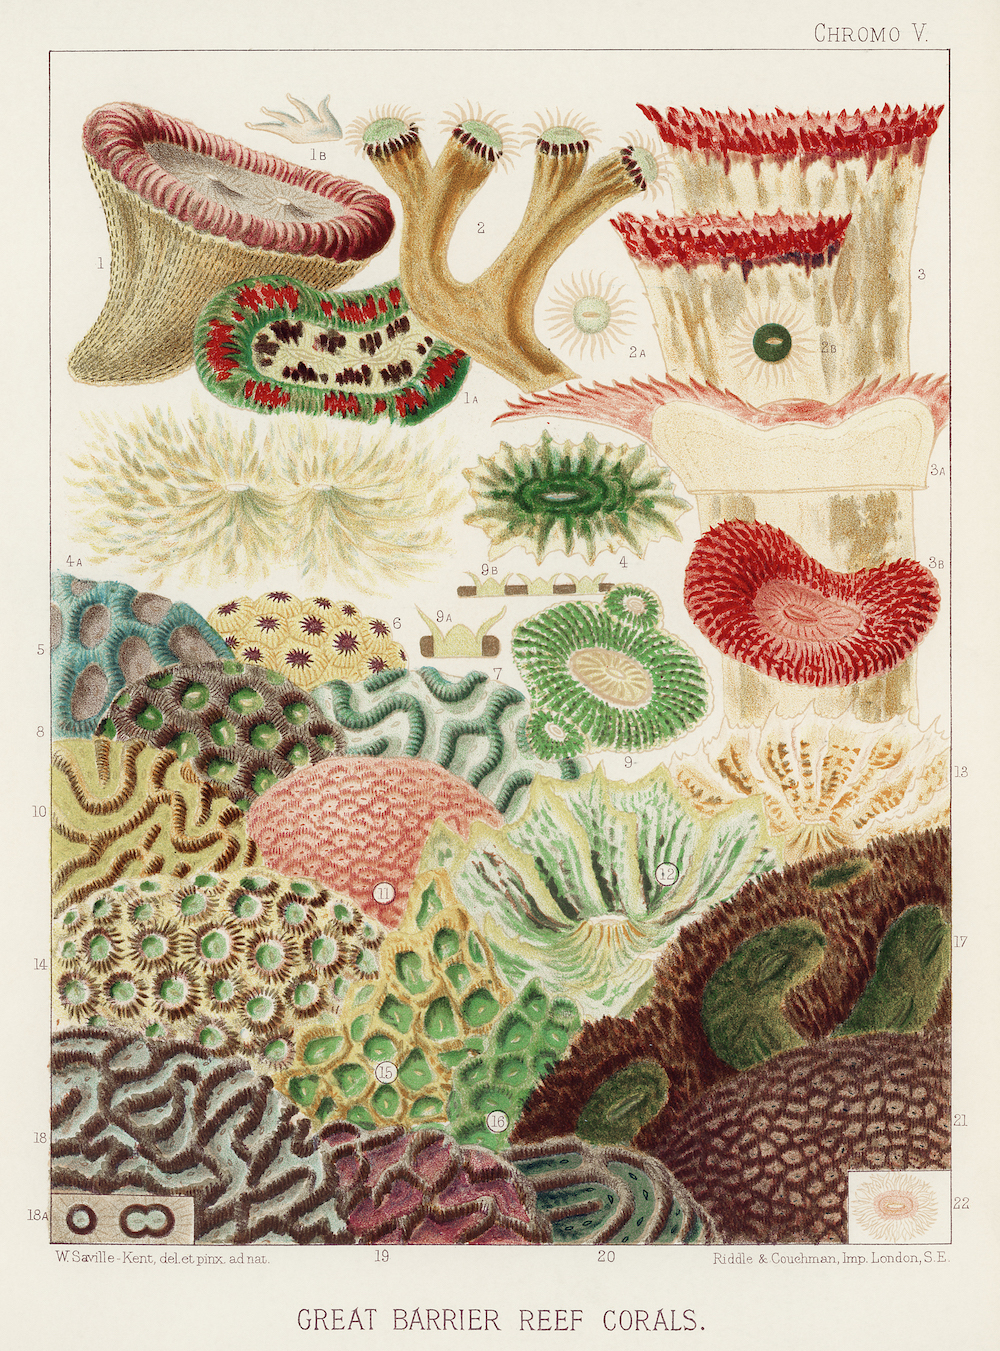 Cuemars A3 Botanical Print | Great Barrier Reef Study by William Saville-Kent